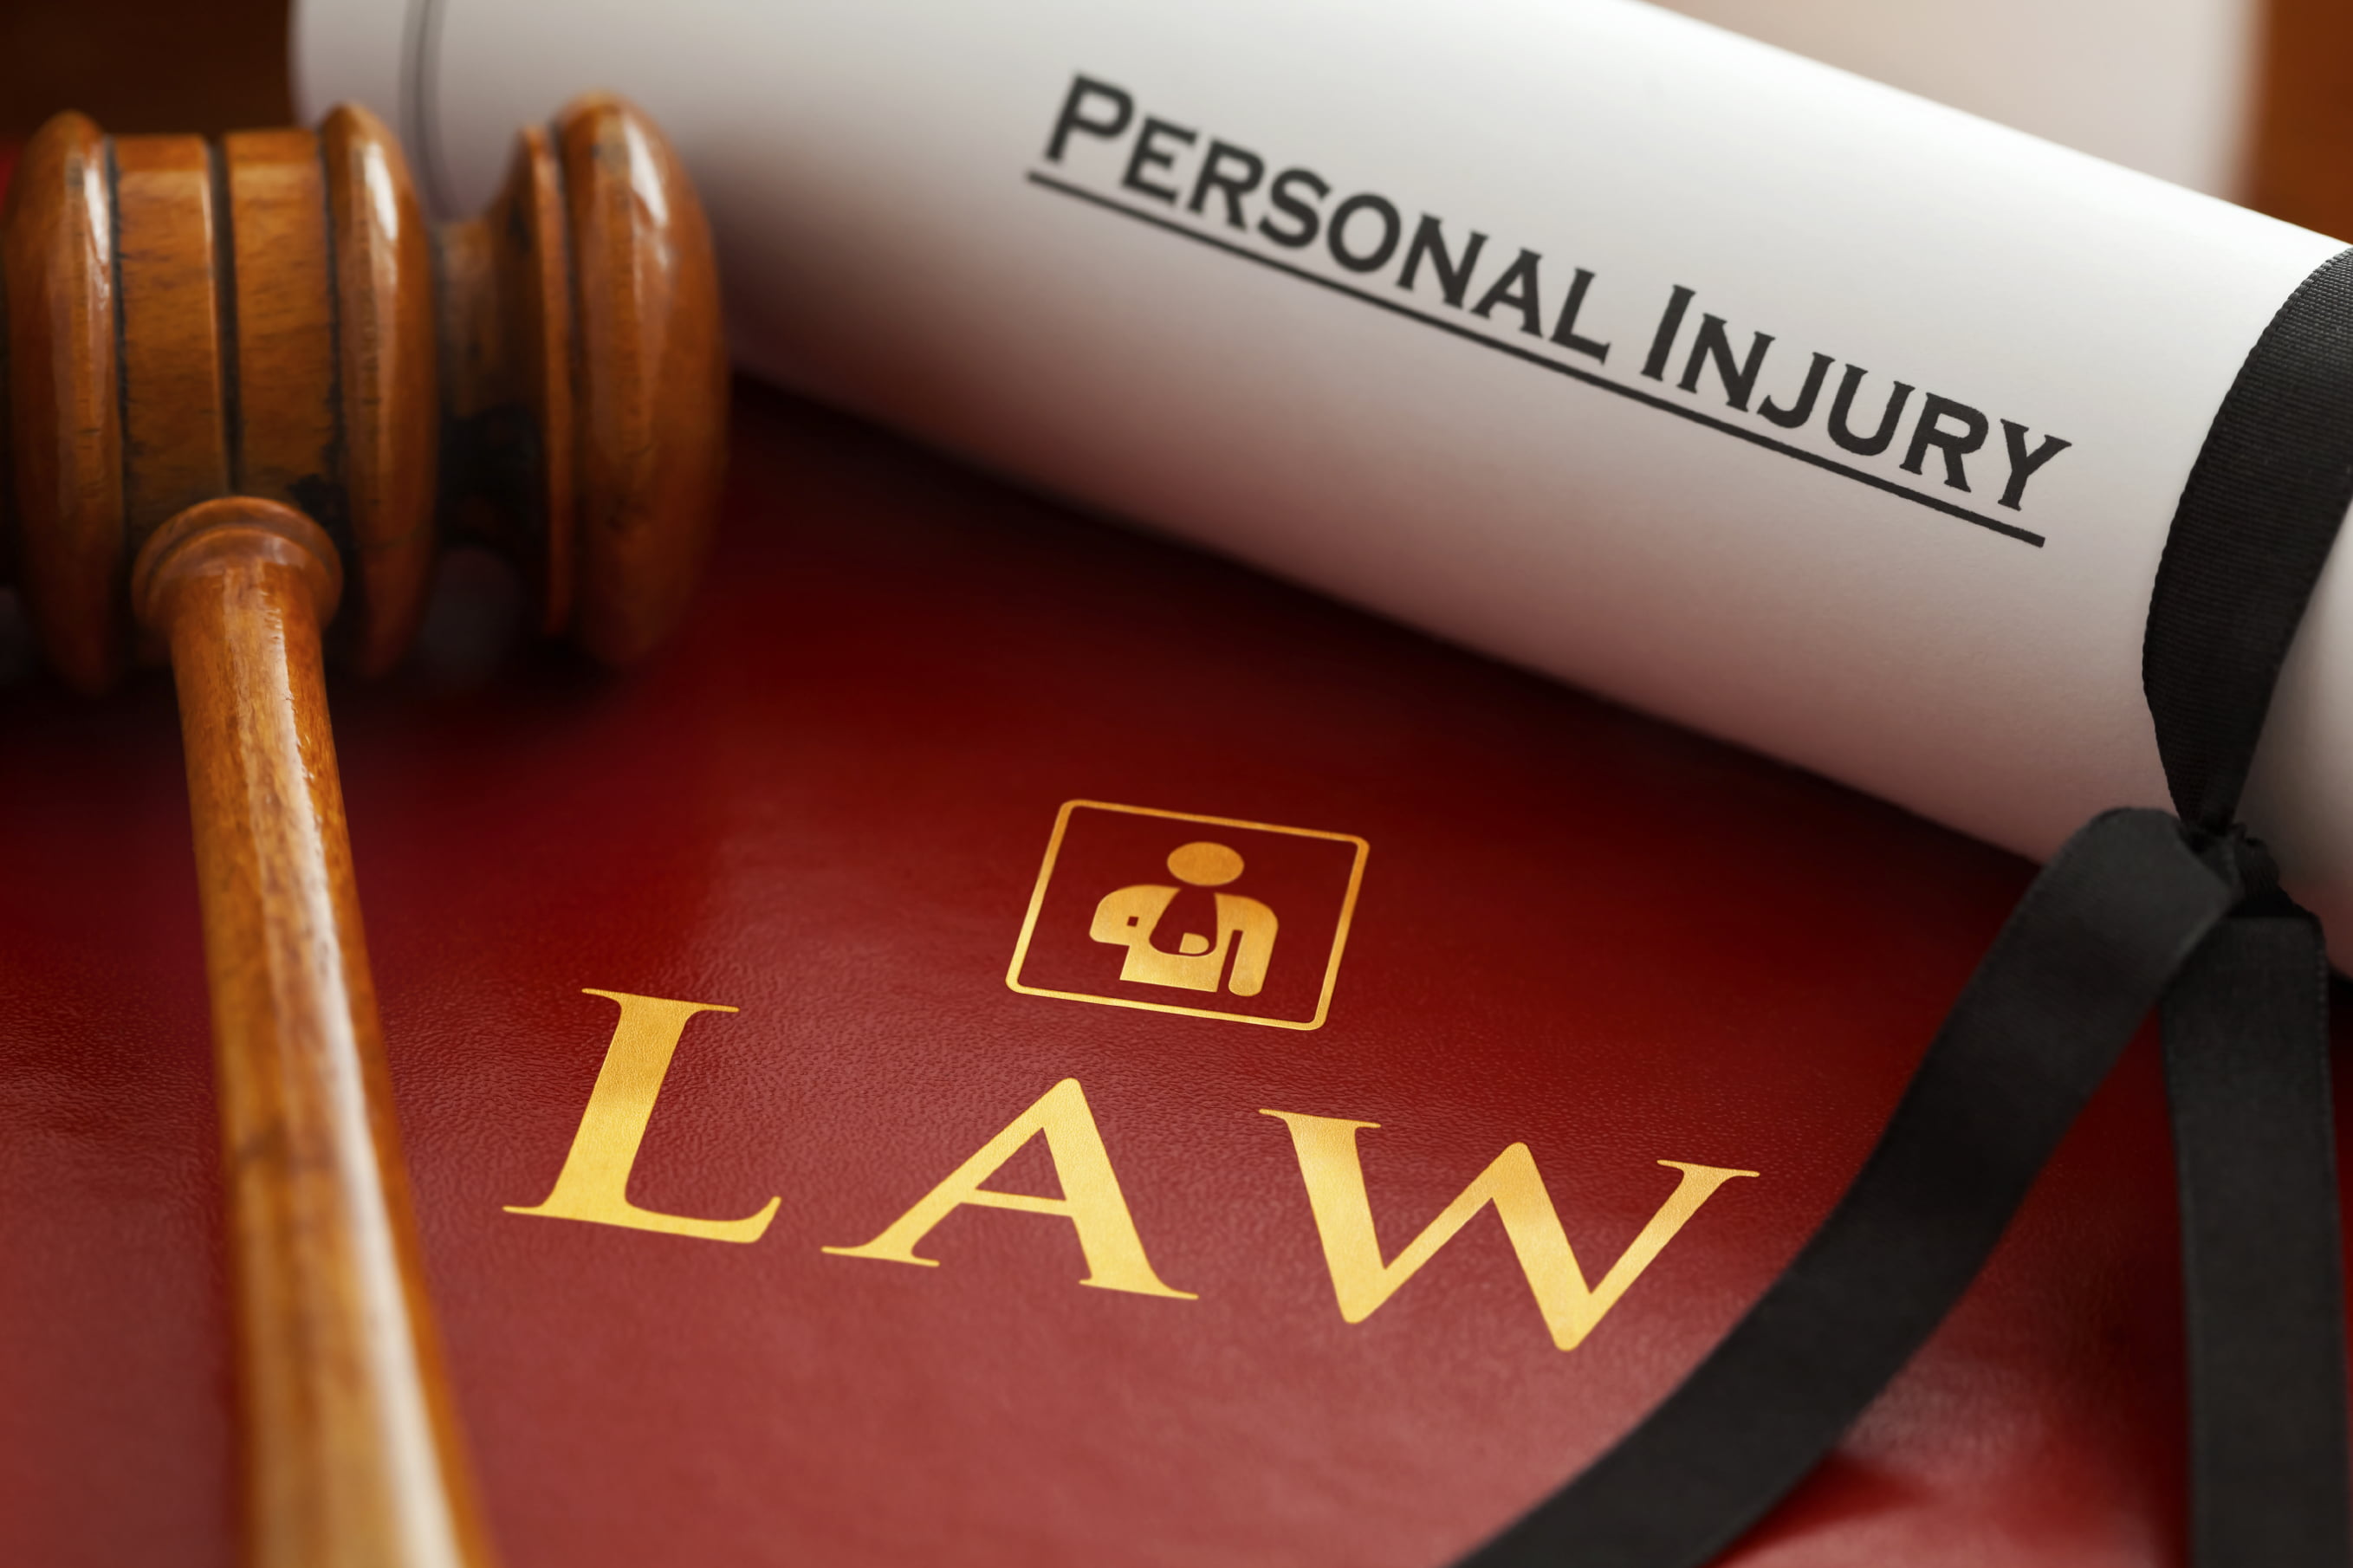 11 Questions To Ask Personal Injury Lawyers Before Hiring Them